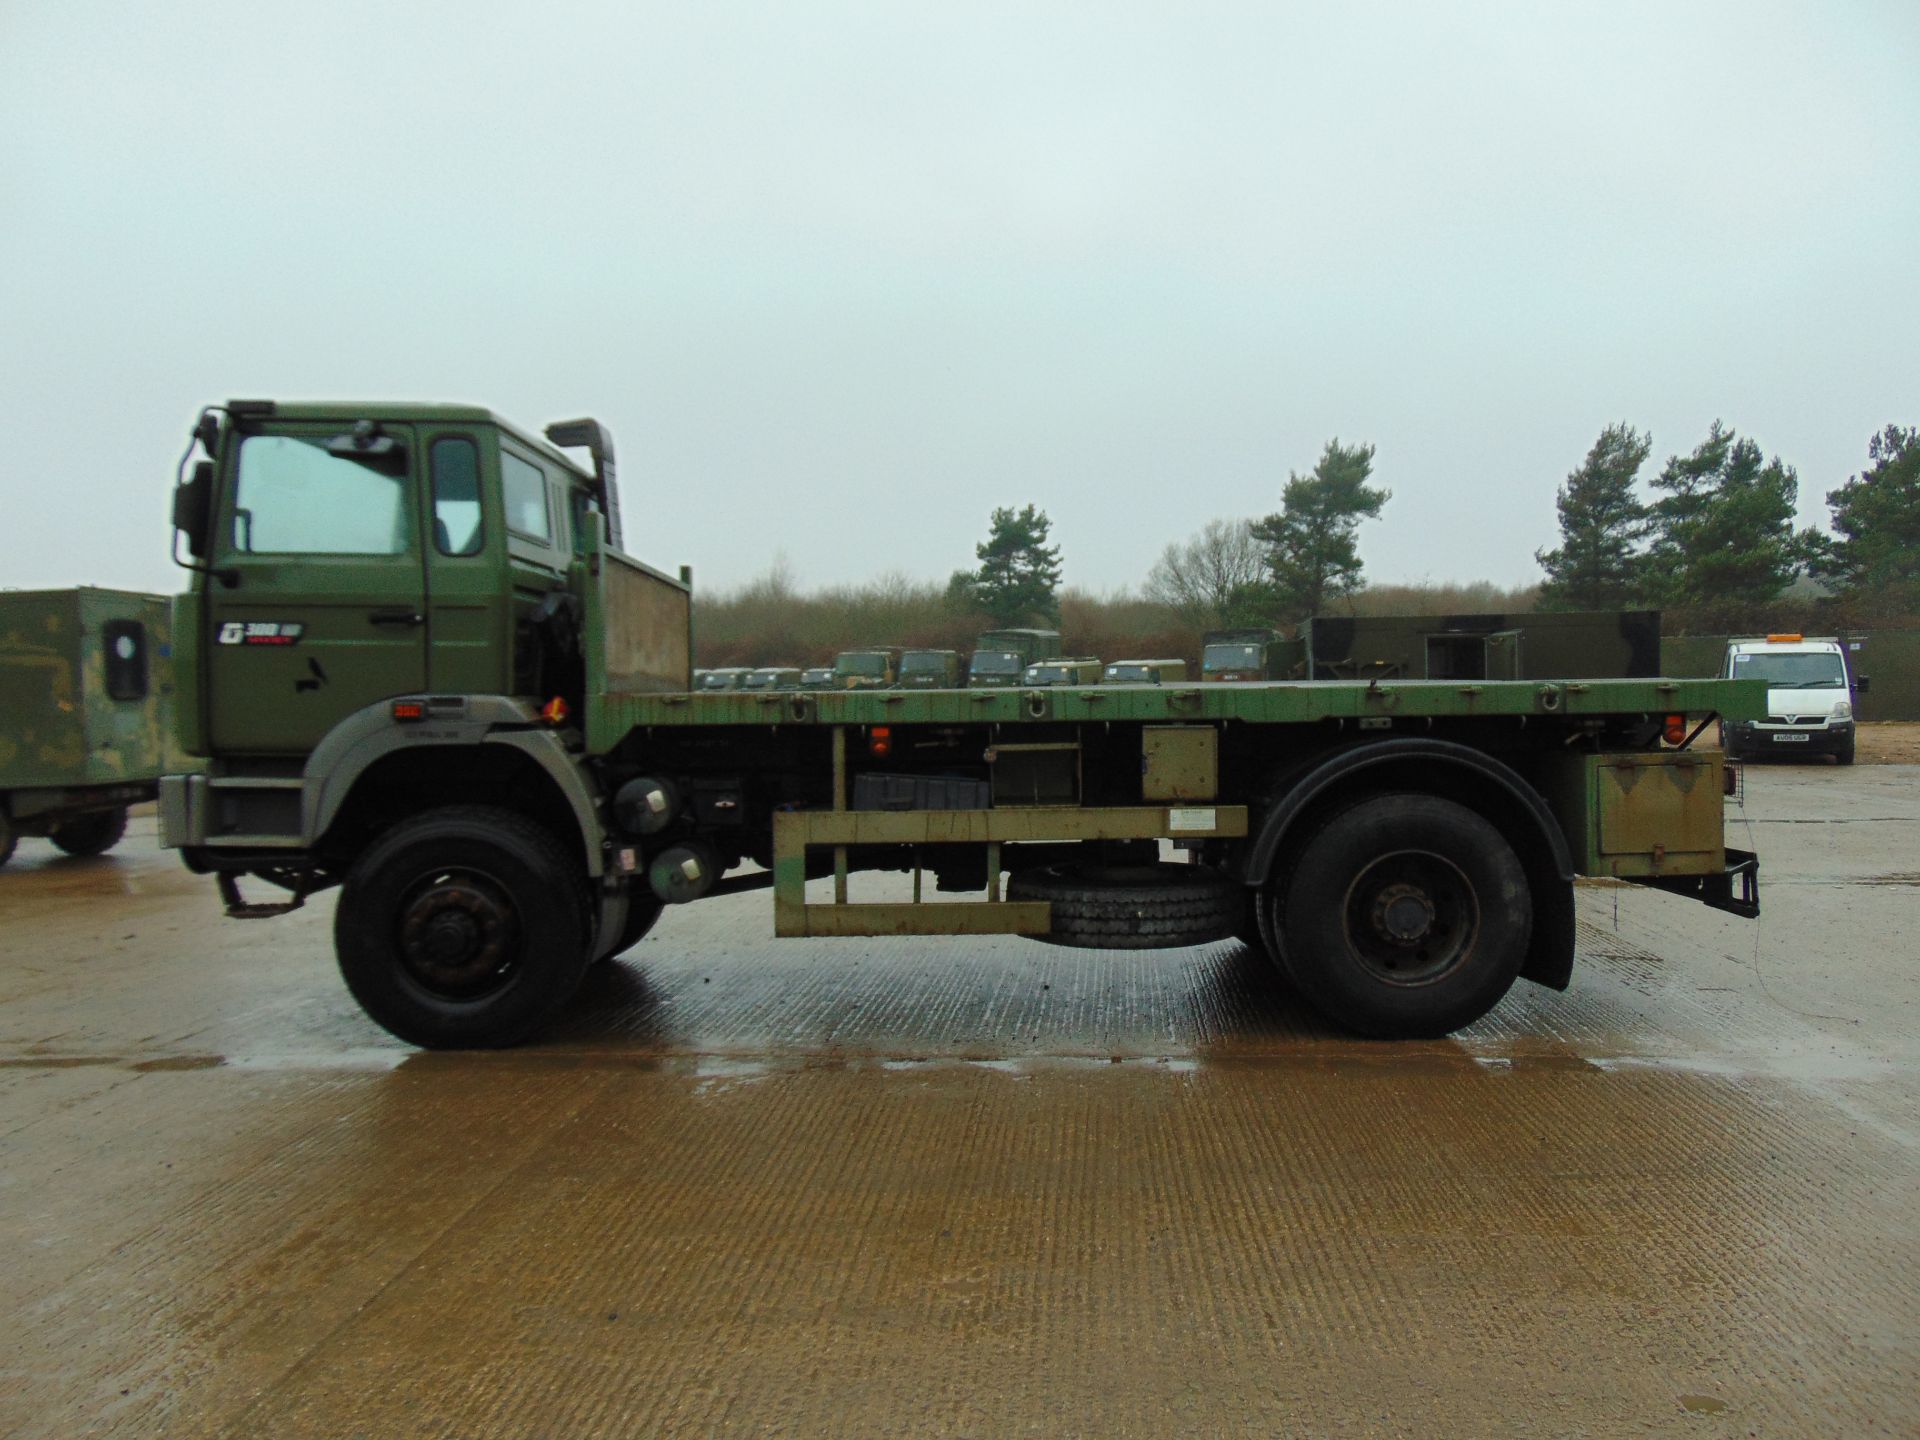 Renault G300 Maxter RHD 4x4 8T Cargo Truck with fitted winch - Image 4 of 16